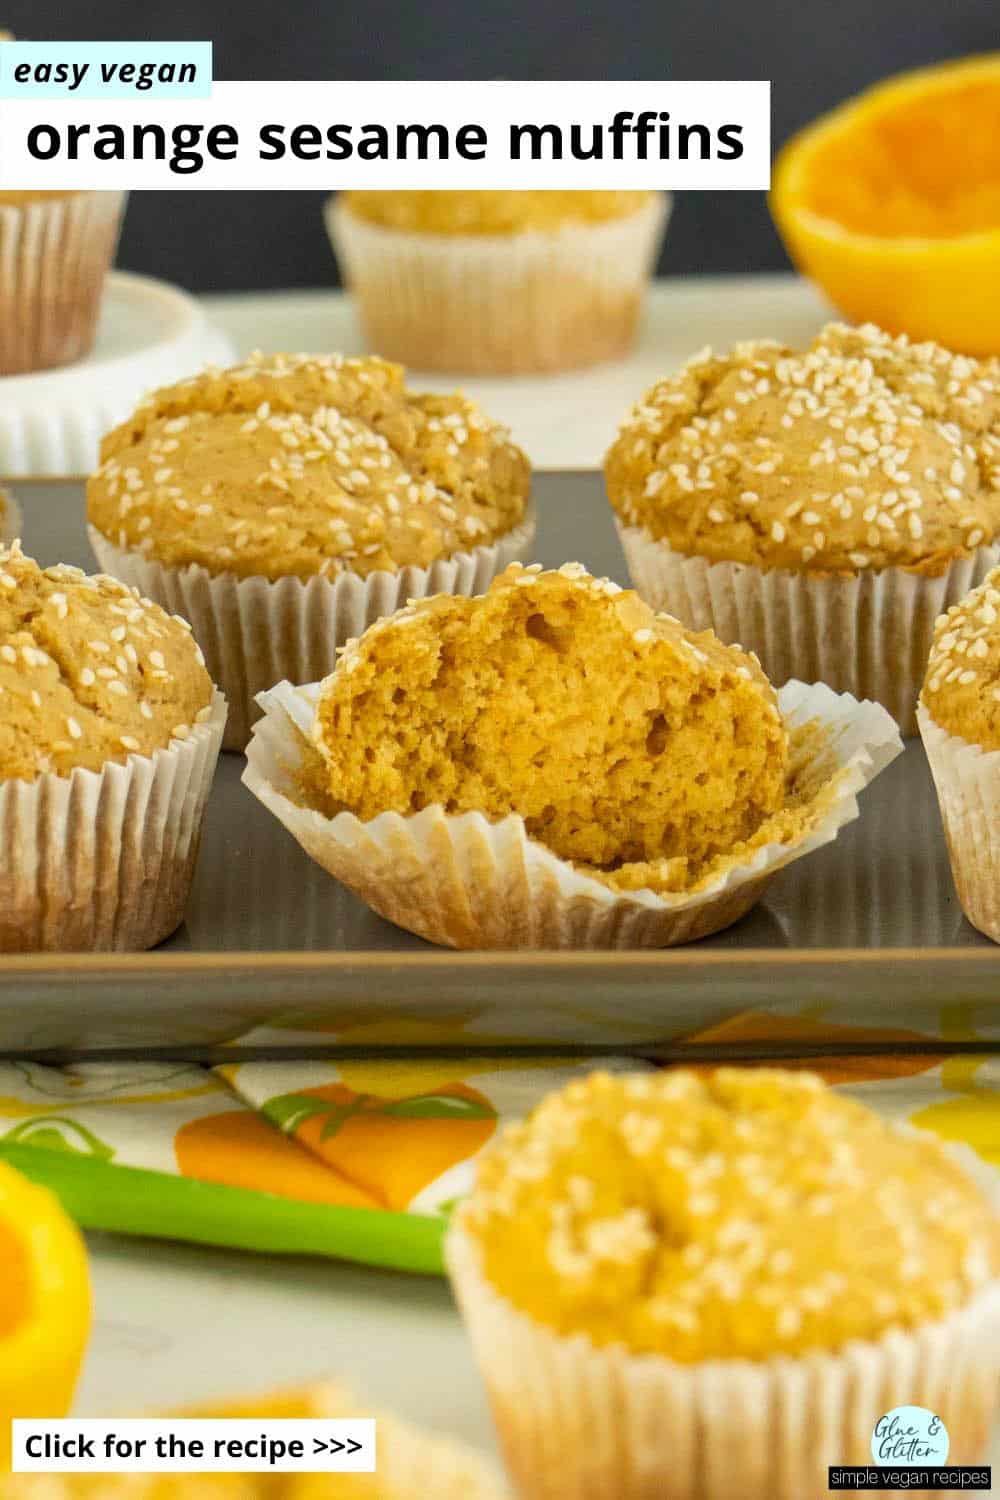 orange sesame muffins on a serving tray with oranges, one muffin torn in half, so you can see the texture inside, text overlay